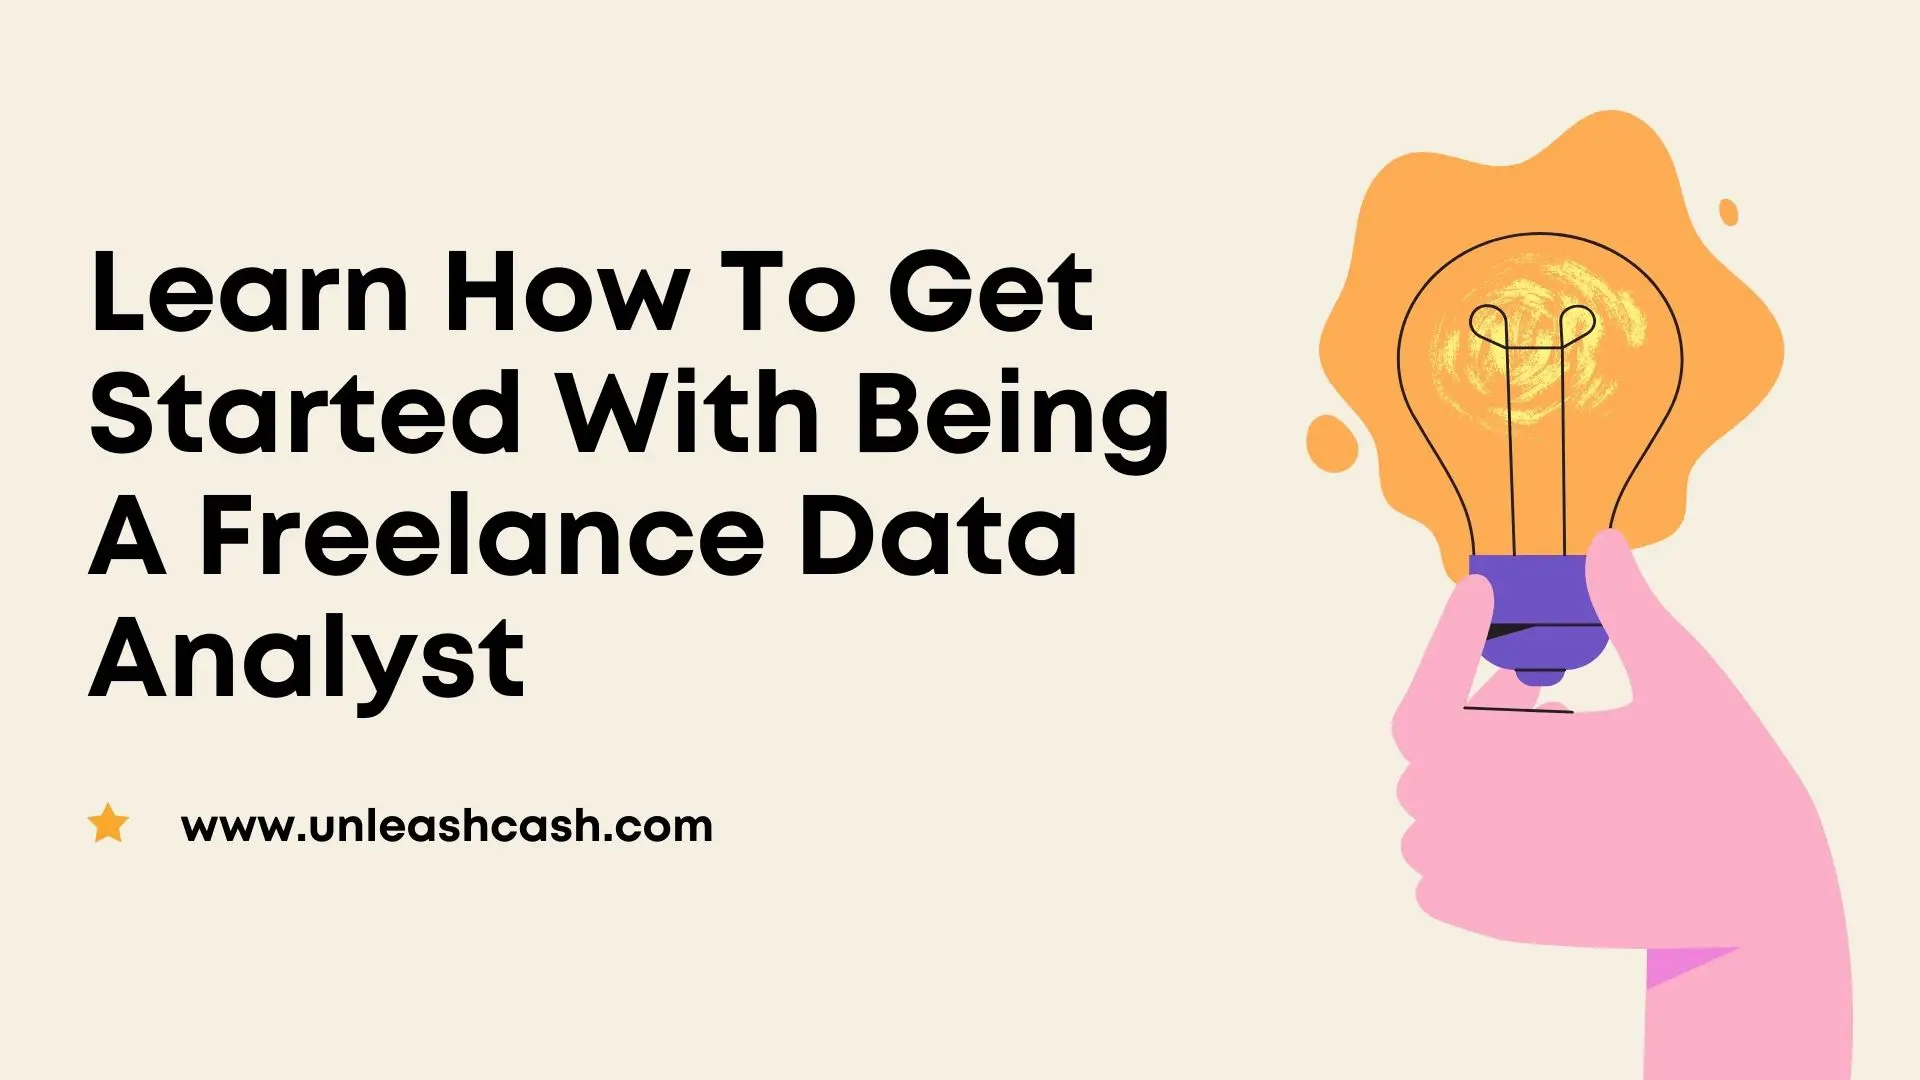 Learn How To Get Started With Being A Freelance Data Analyst